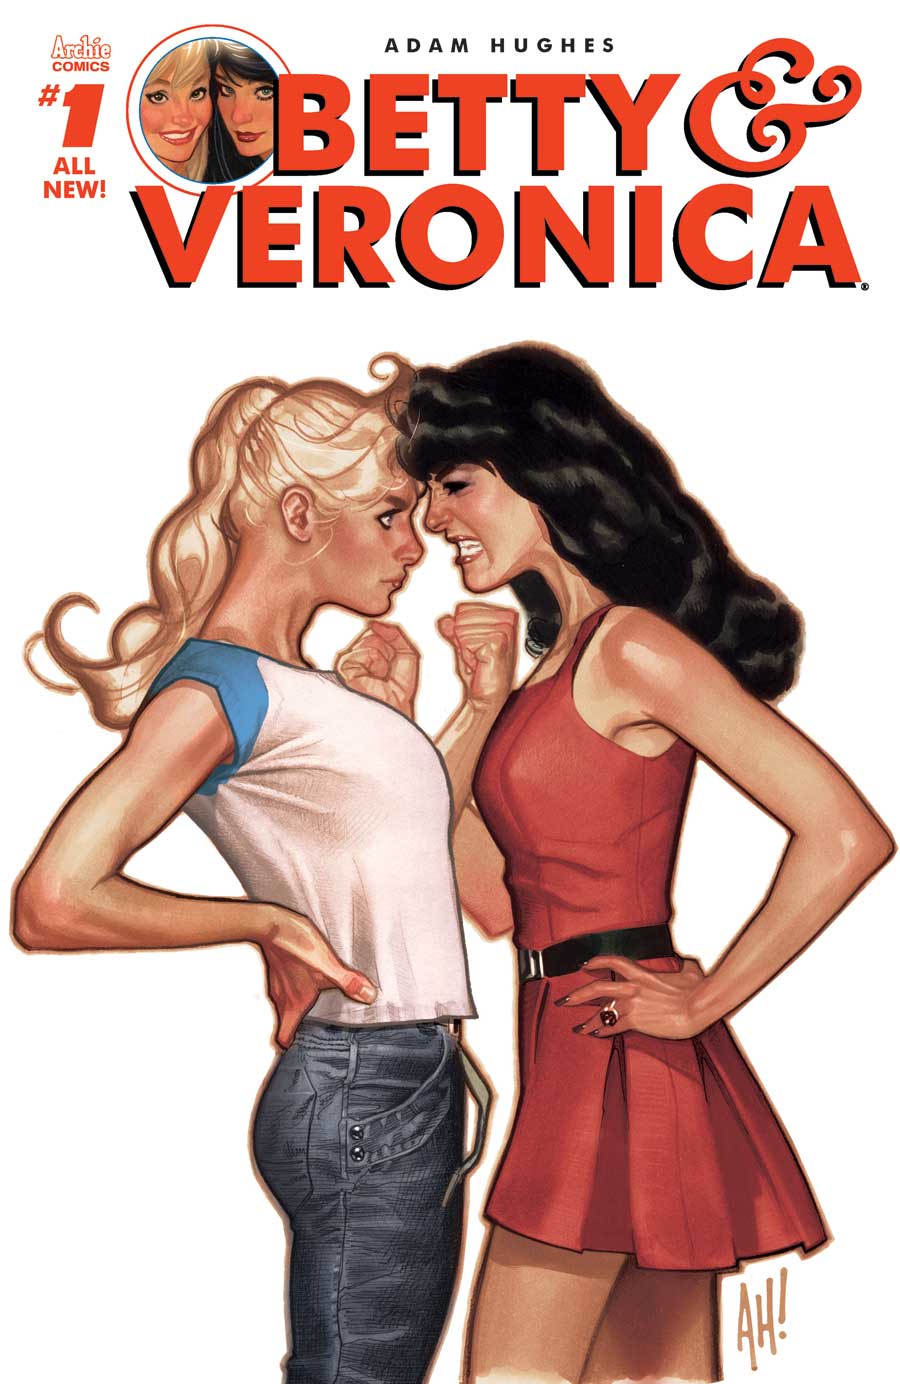 An All New BETTY VERONICA Series Launches July 20th Pre Order Your